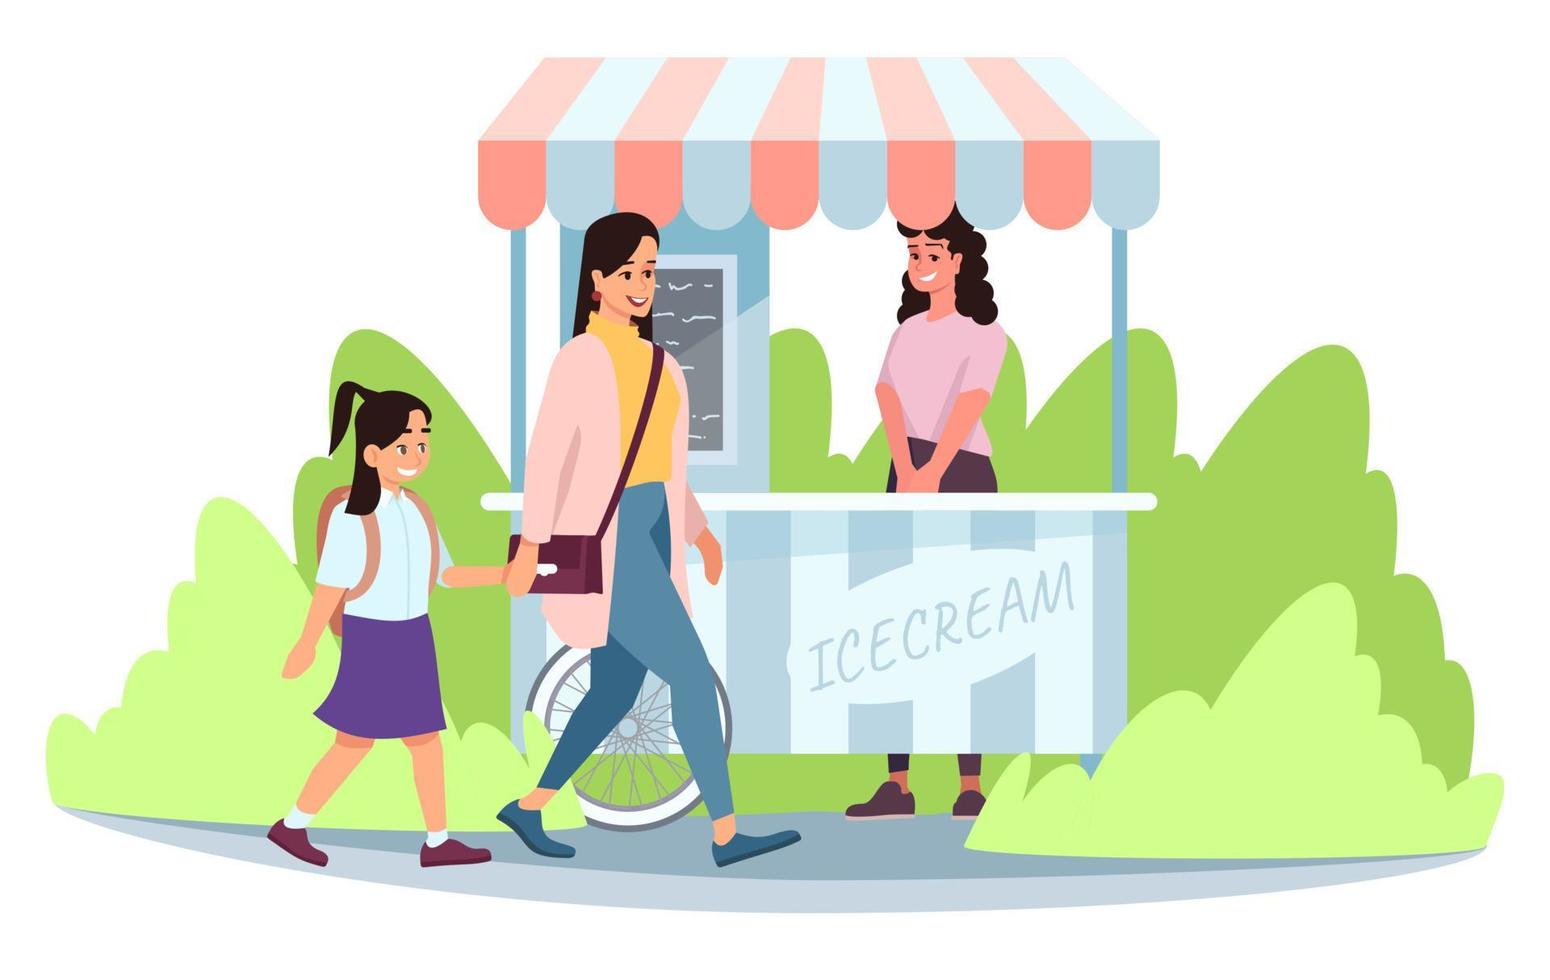 Ice cream street market cart with seller flat vector illustration. Mother and daughter at sweets, icecream trolley, stall cartoon characters. Summer fair, funfair, amusement park attractions